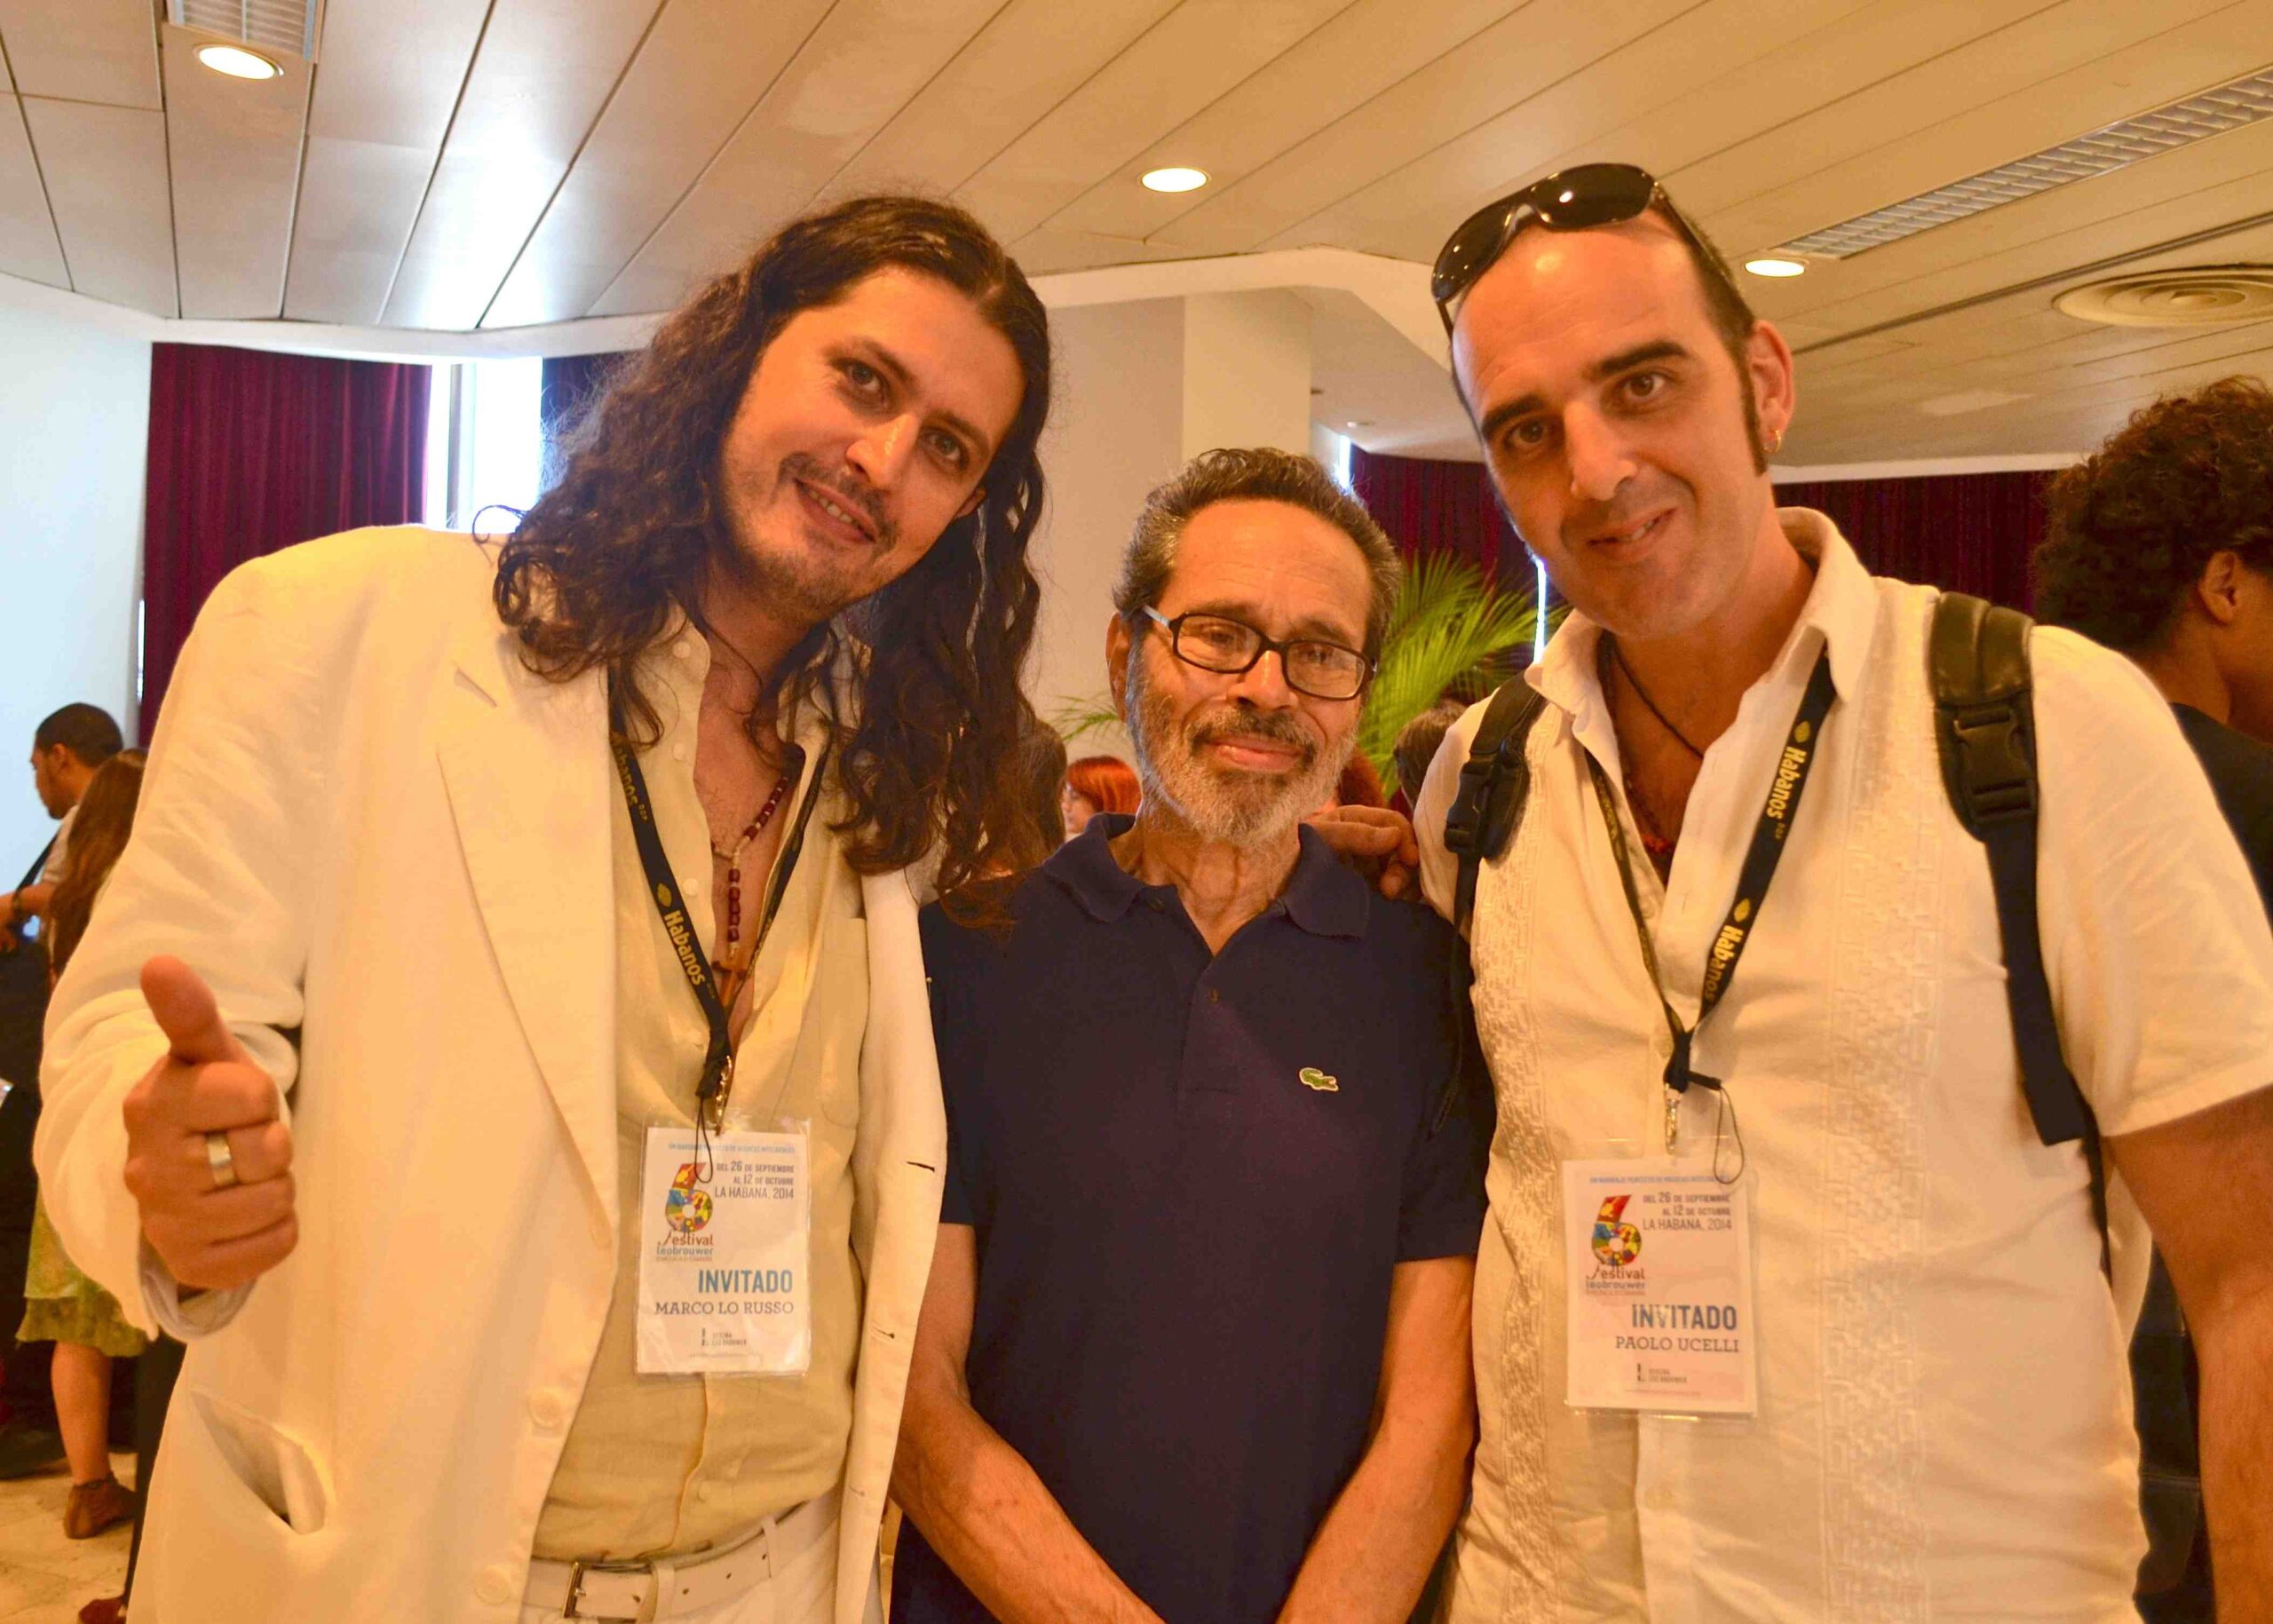 Marco Lo Russo with Leo Brouwer and Paolo Uccelli